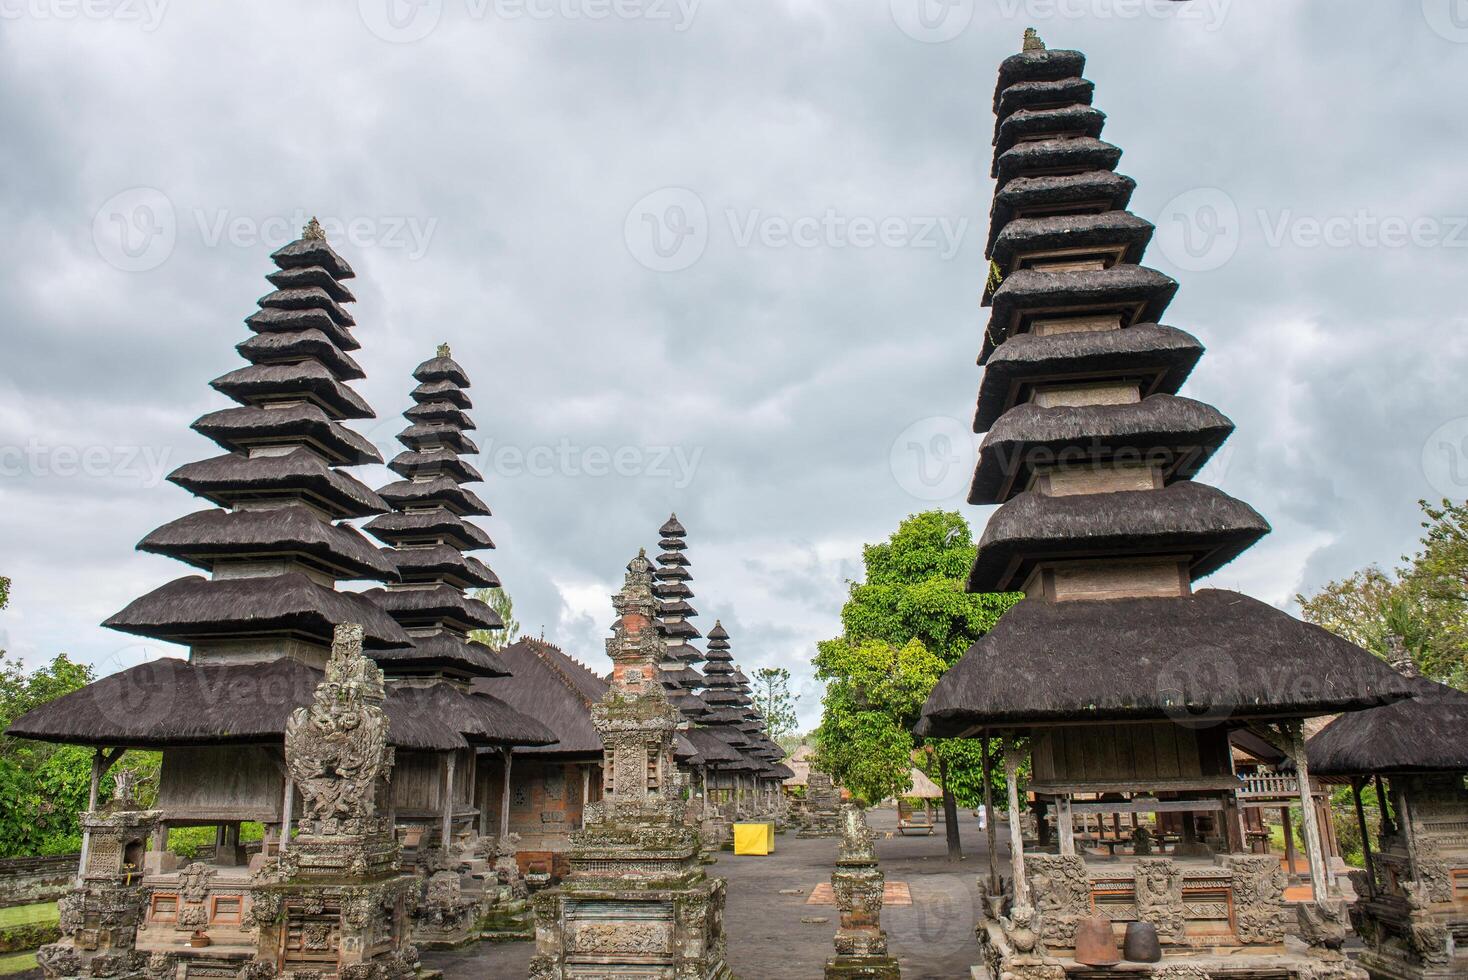 One of the popular temple in Bali named Pura Taman Ayun the royal temple of Mengwi empire in Badung Regency, Bali, Indonesia. View in the Cloudy day. photo